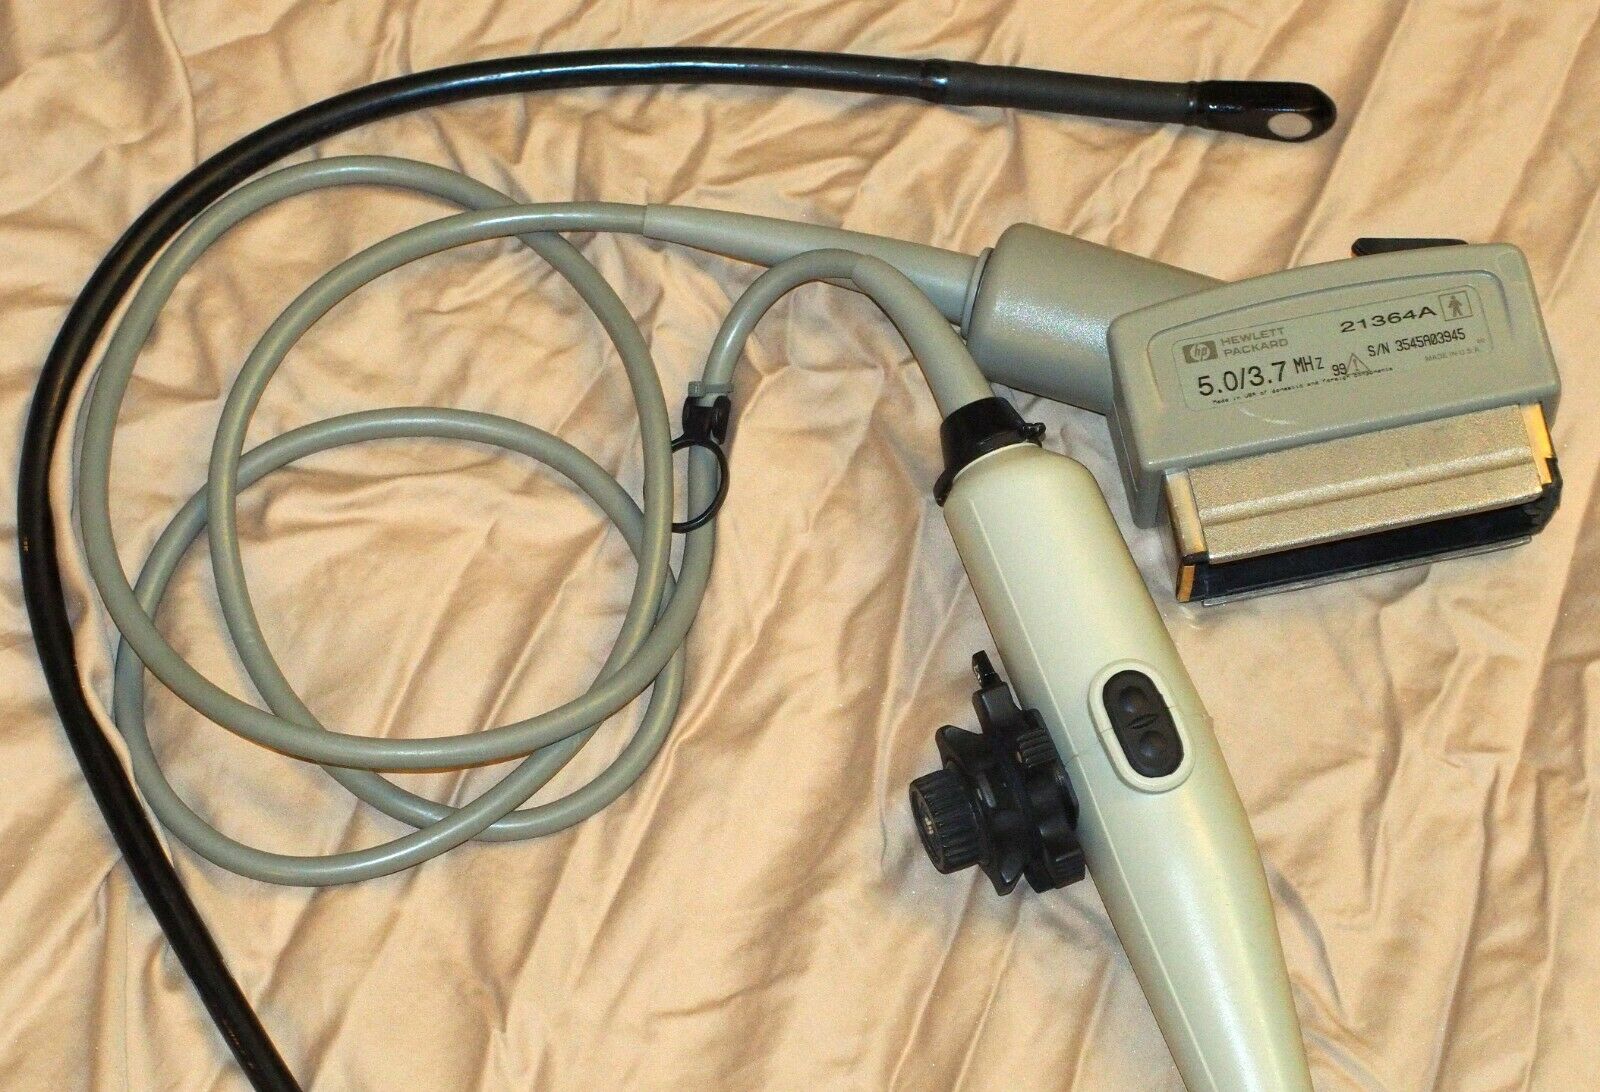 HP #21364A Transesophageal Ultrasound Transducer Probe 5.0/3.7MHz USA DIAGNOSTIC ULTRASOUND MACHINES FOR SALE